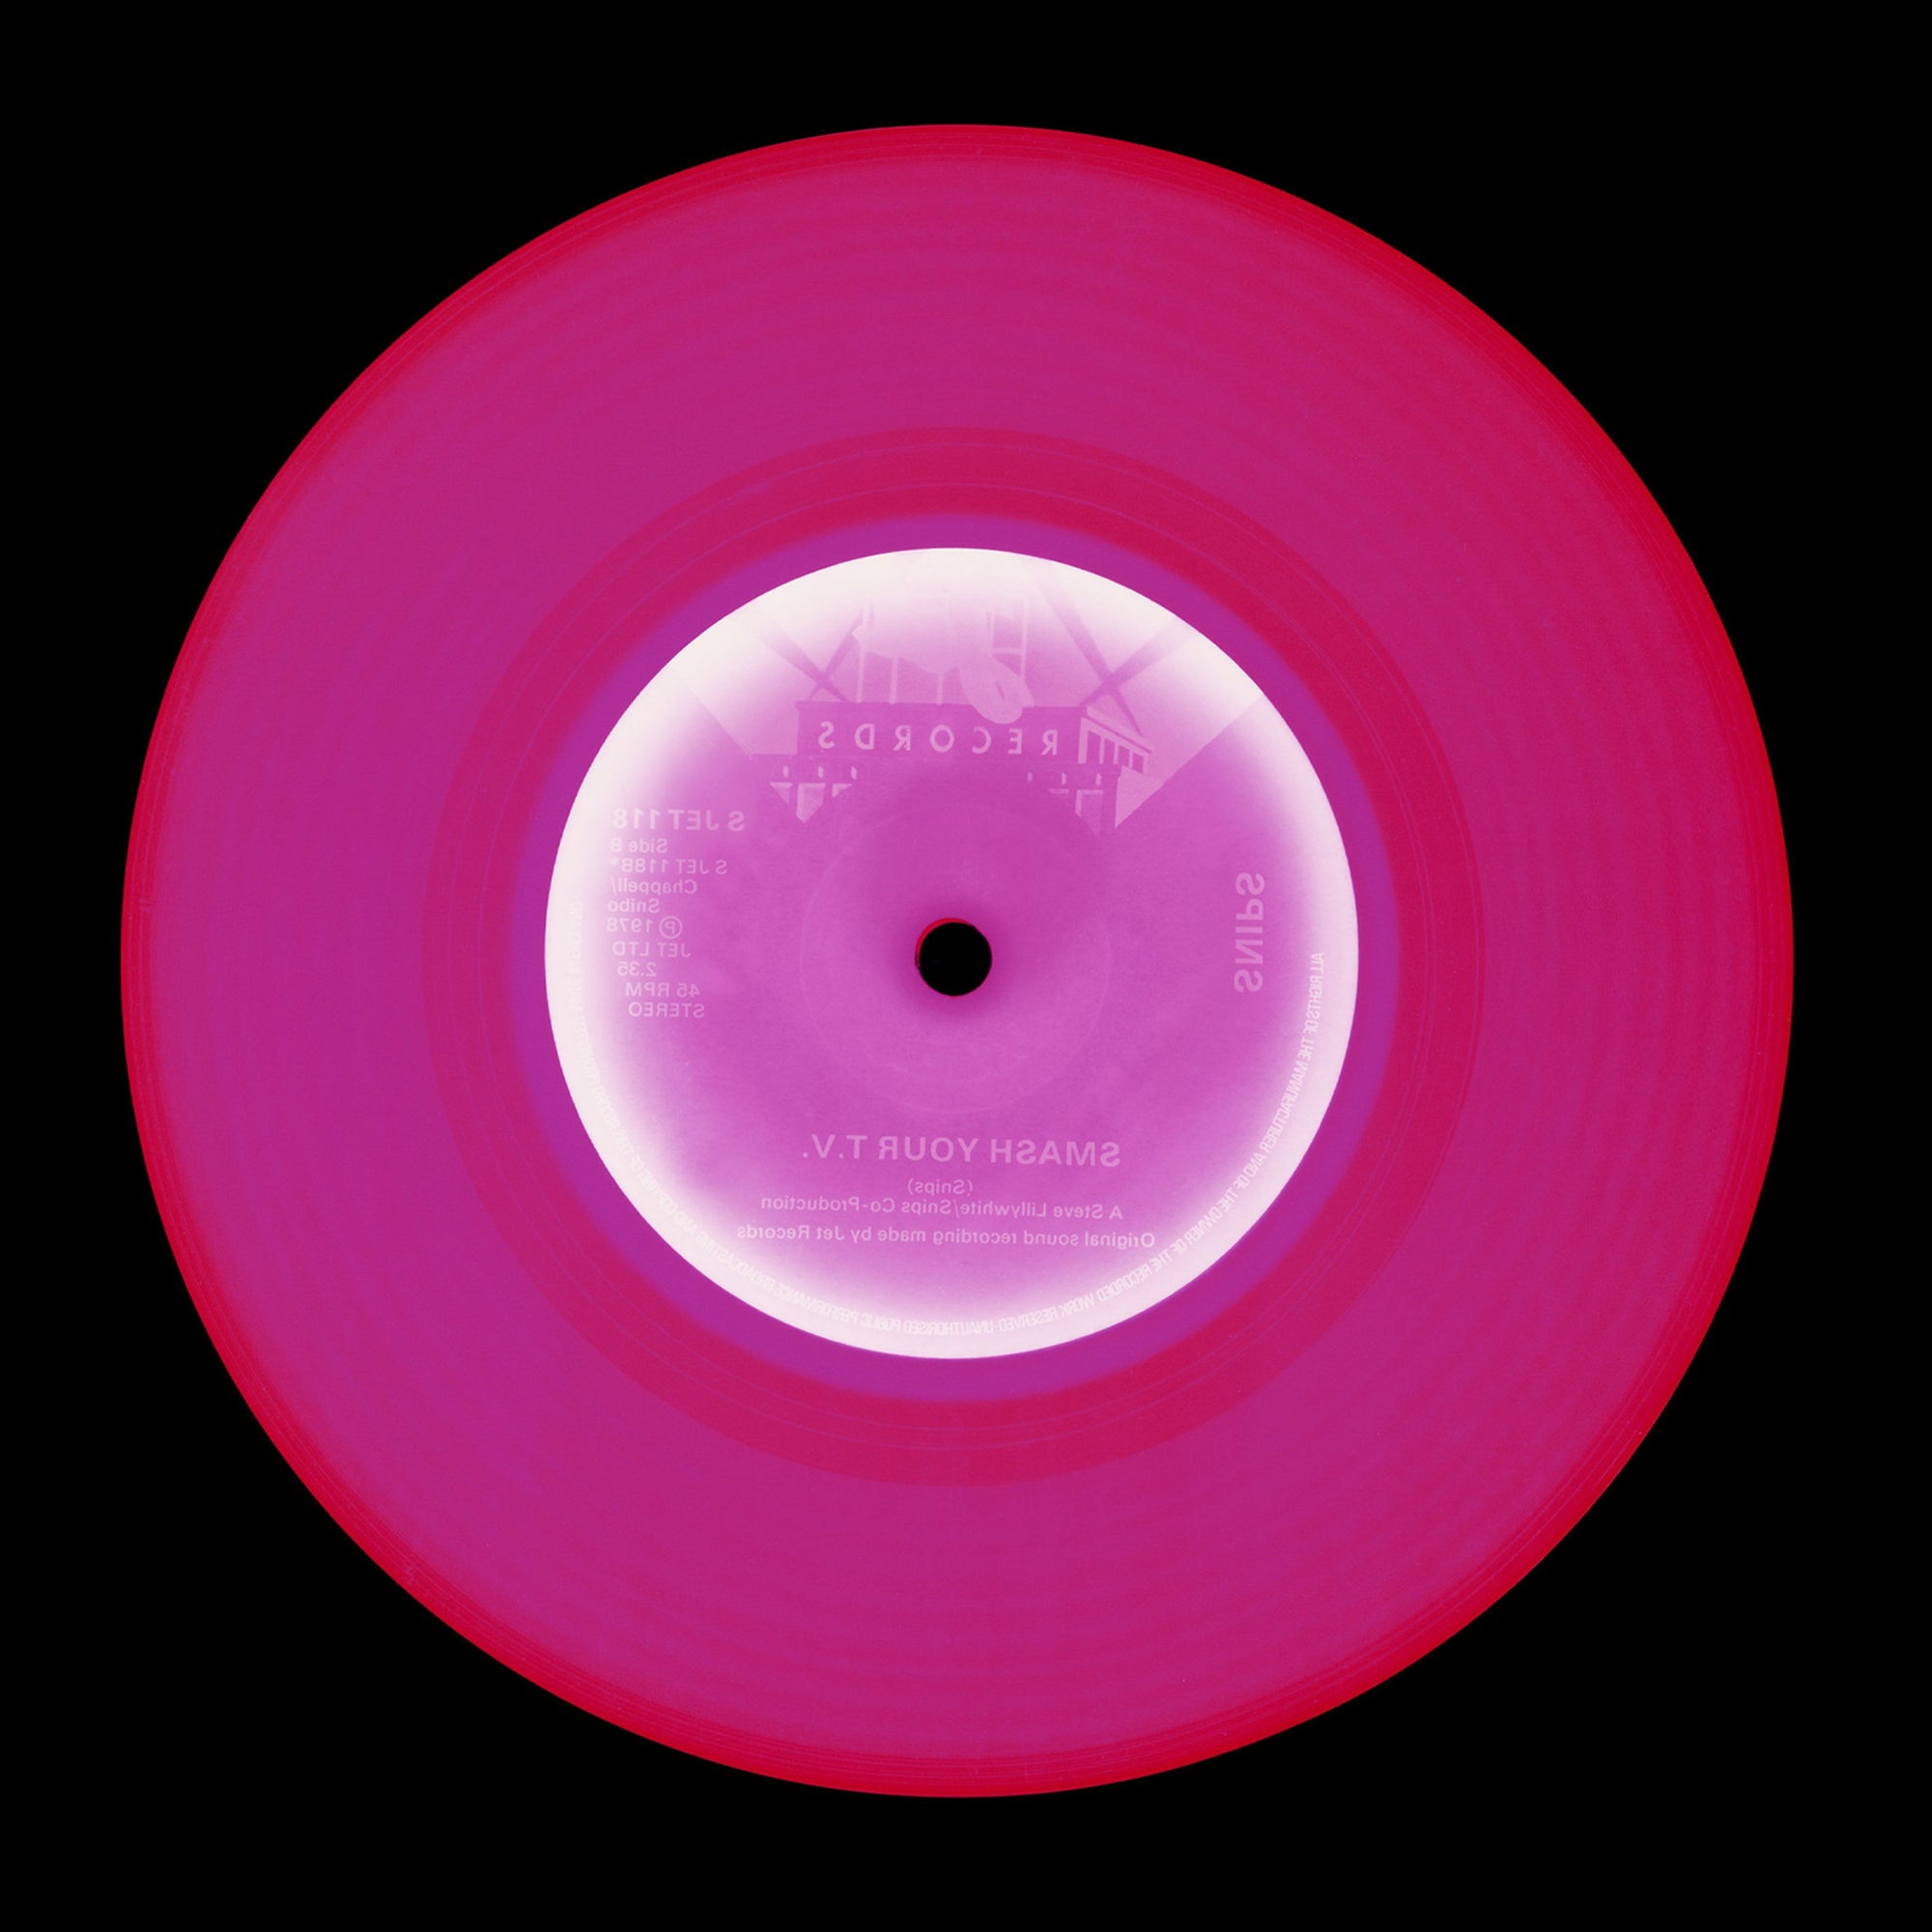 Vinyl Collection 'Side B' (Pink), 2017. Acclaimed contemporary photographers, Richard Heeps and Natasha Heidler have collaborated to make this beautifully mesmerising collection. A celebration of the vinyl record and analogue technology, which reflects the artists practice within photography. 